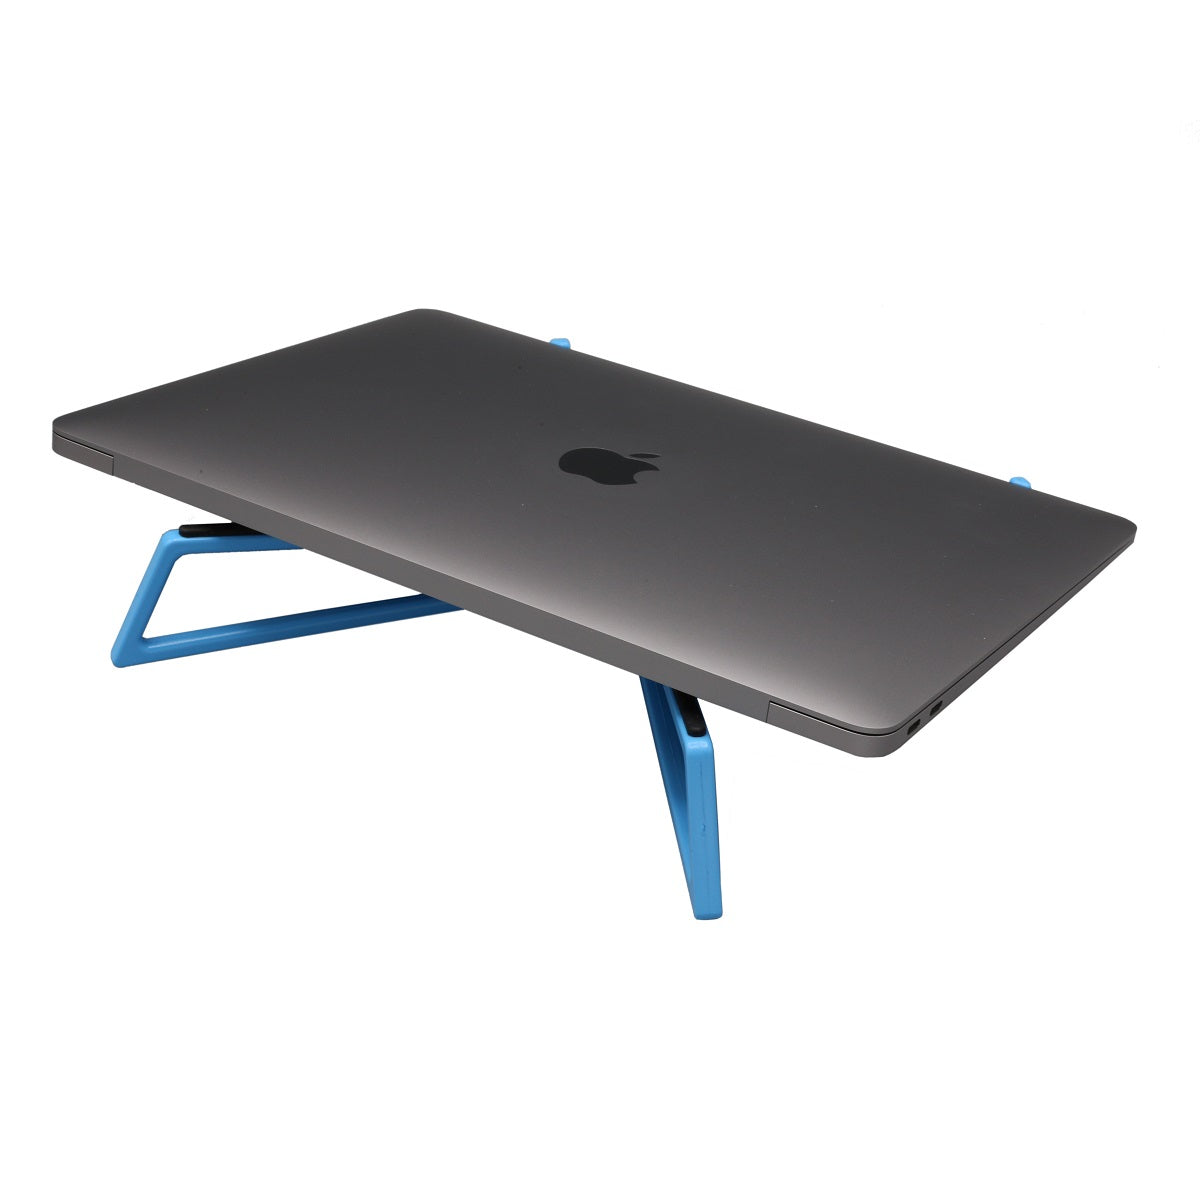 The FlexVerk Laptop Stand is shown in blue expanded and supporting a closed Macbook Air on a white background.